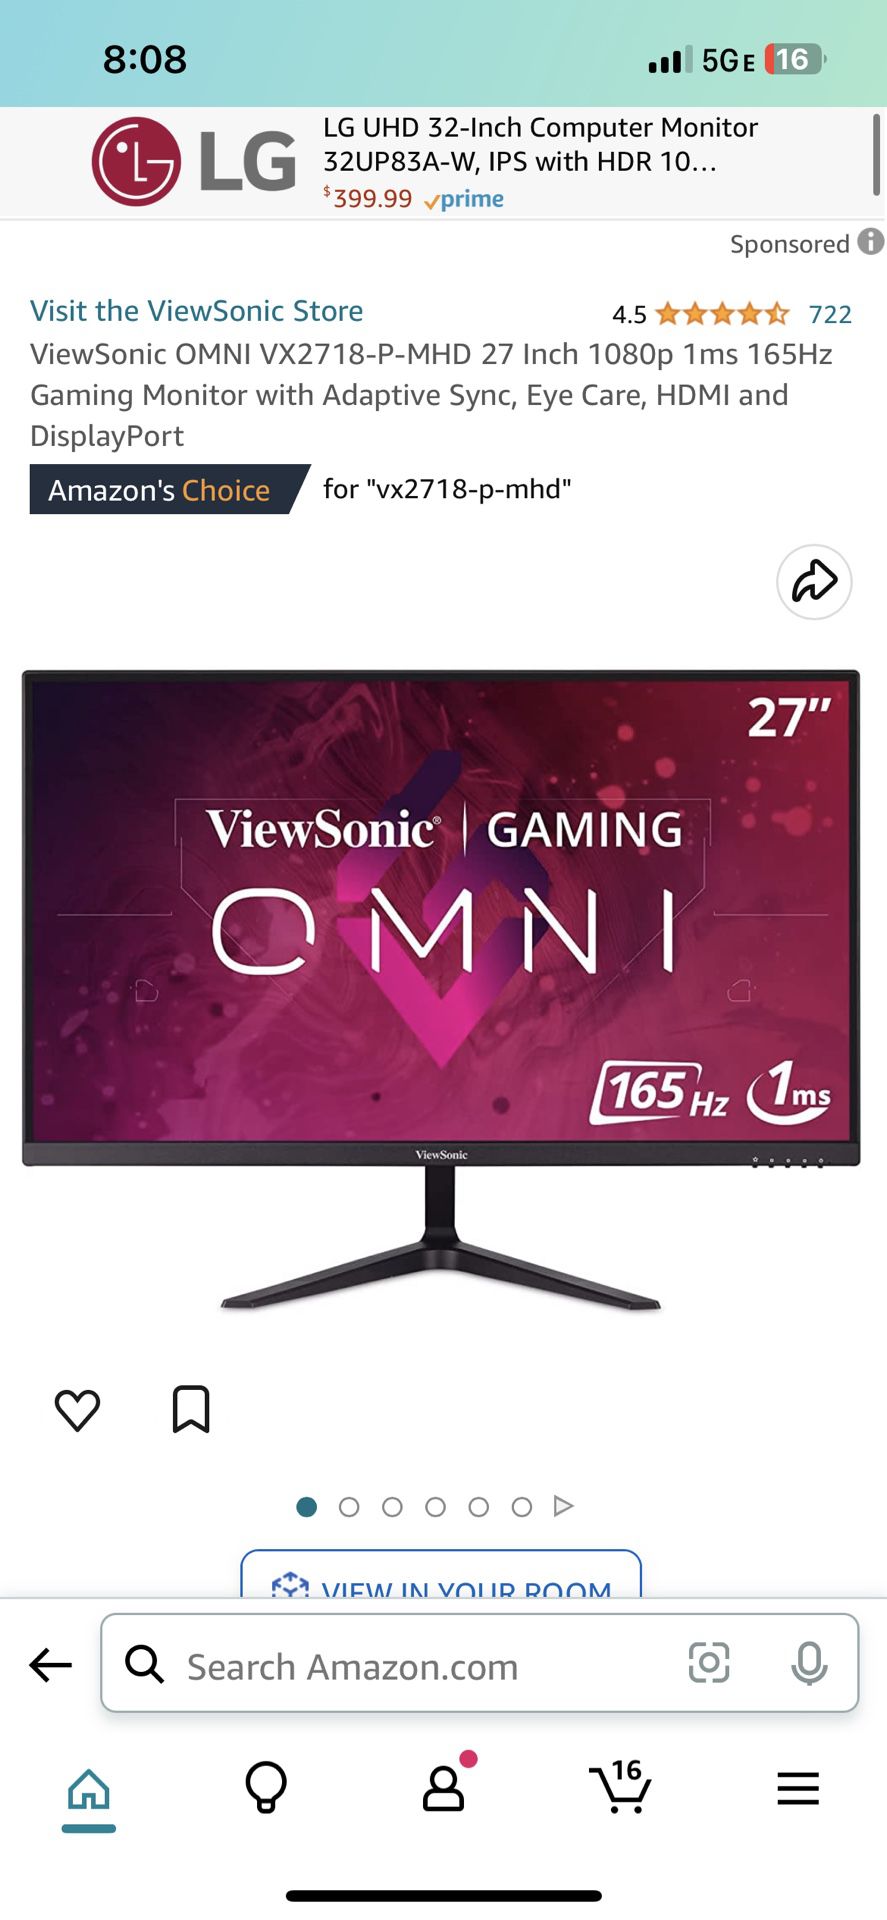 ViewSonic OMNI VX2718-P-MHD 27 Inch 1080p 1ms 165Hz Gaming Monitor with Adaptive  Sync, Eye Care, HDMI and DisplayPort for Sale in Costa Mesa, CA OfferUp